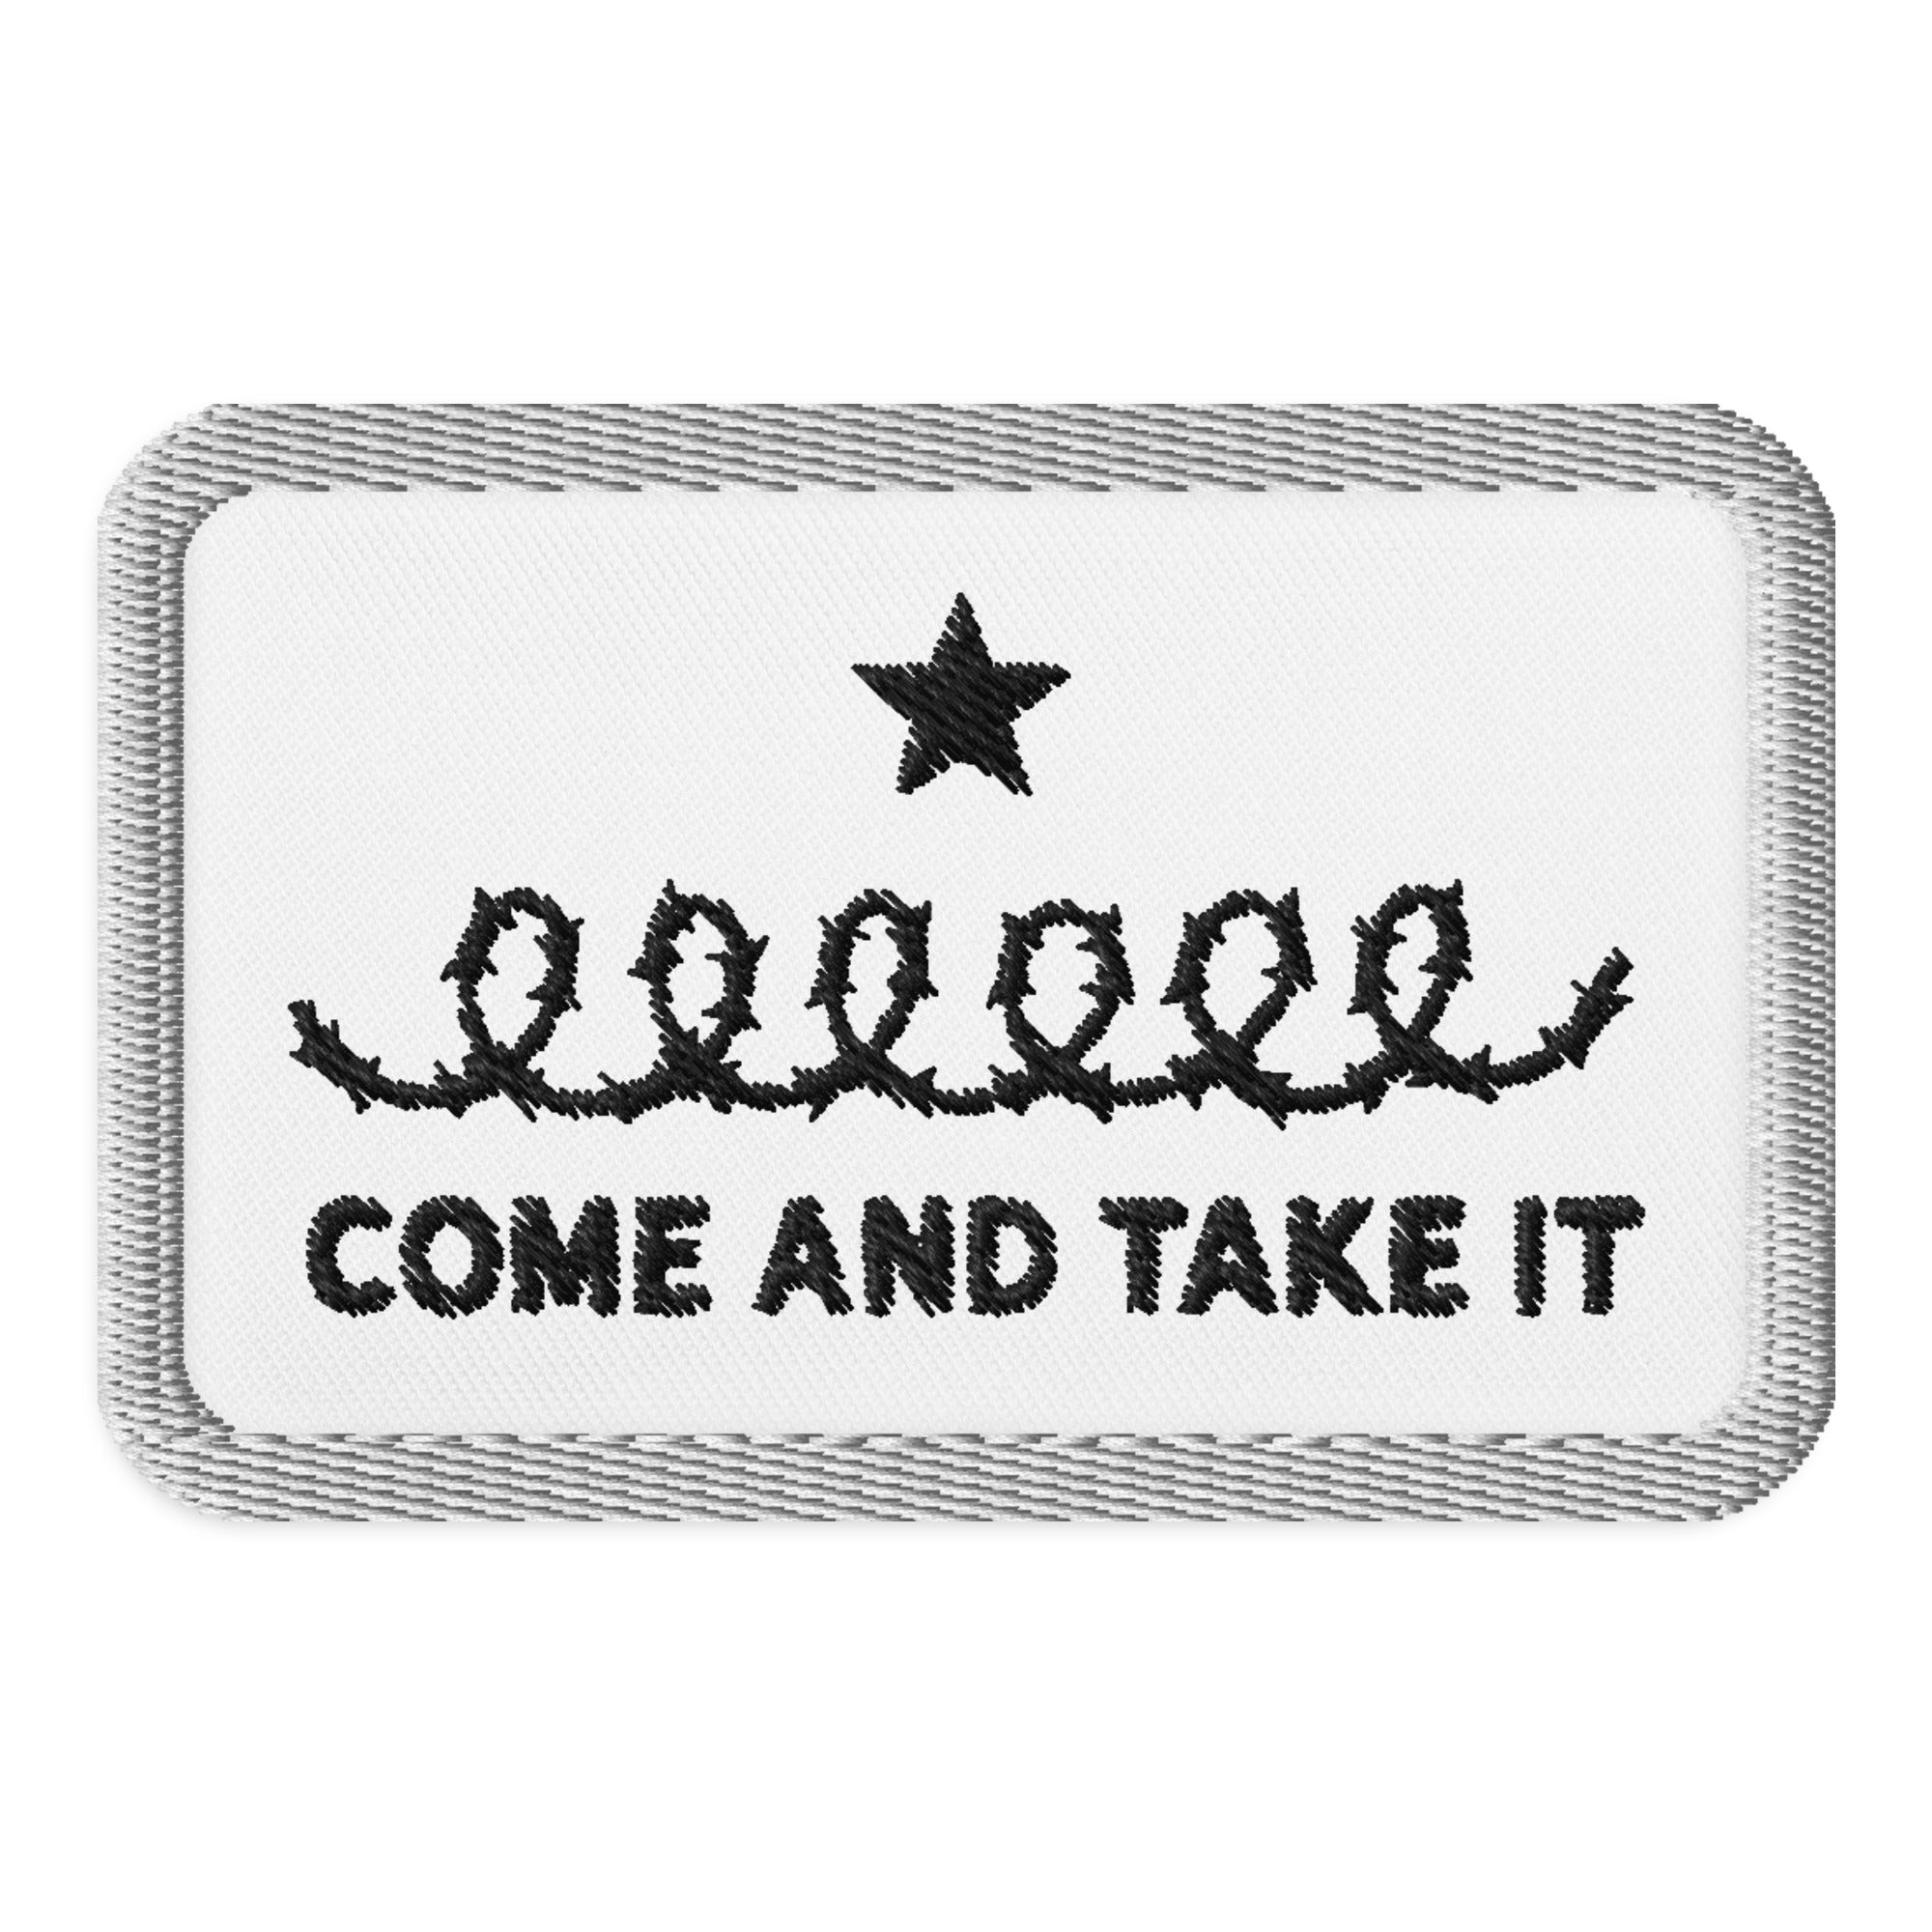 Come and Take It Barbed Wire Lone Star Rebellion Morale Patch